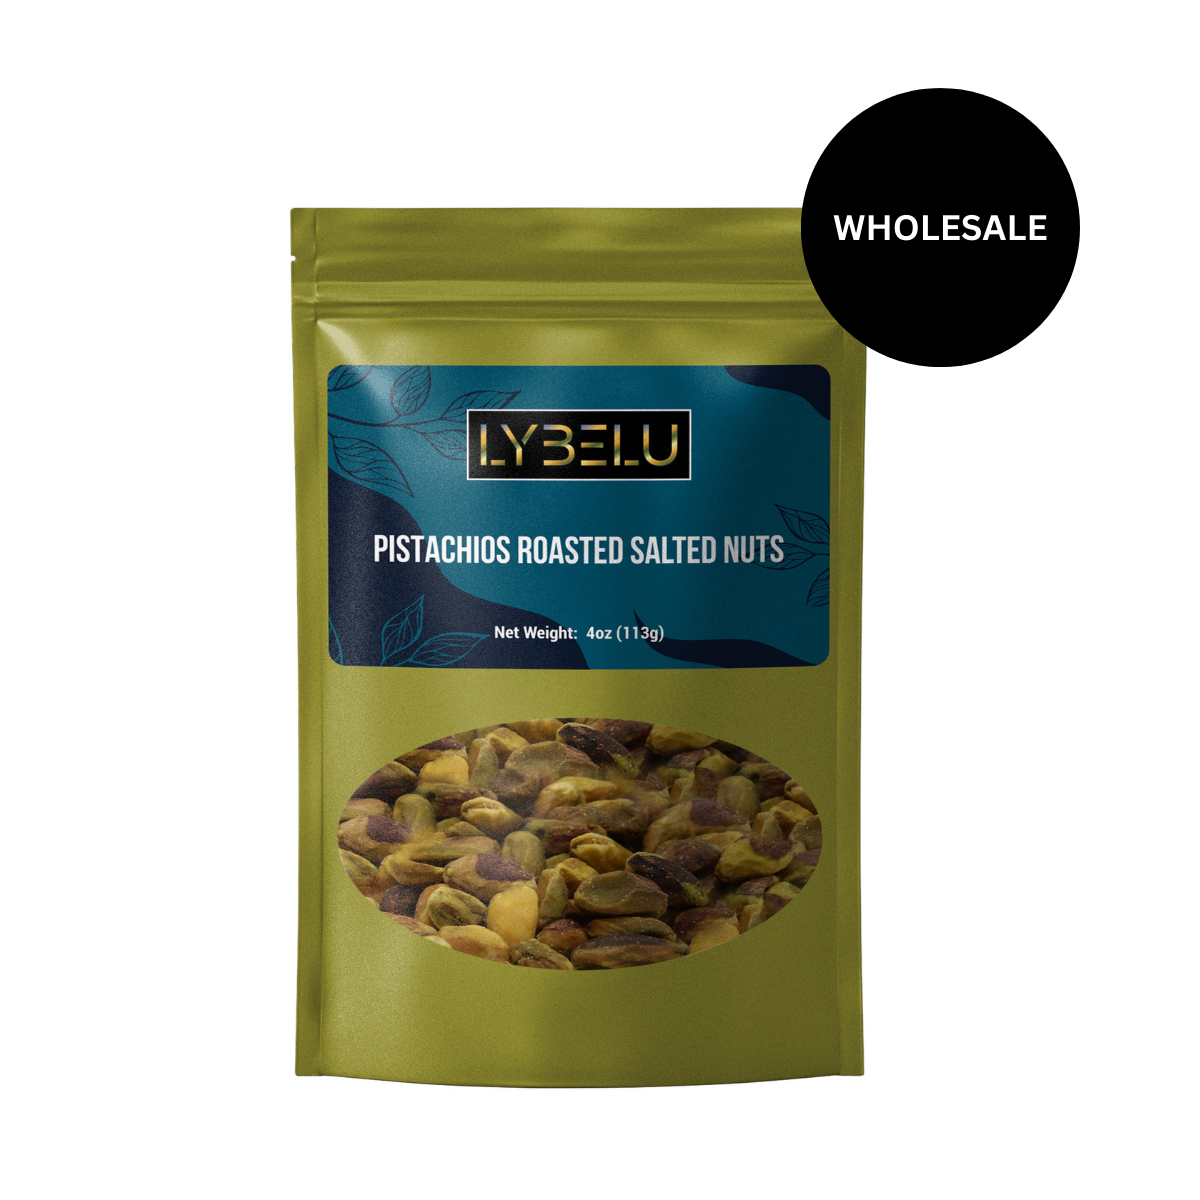 Pistachios Roasted Salted Nuts – 4oz